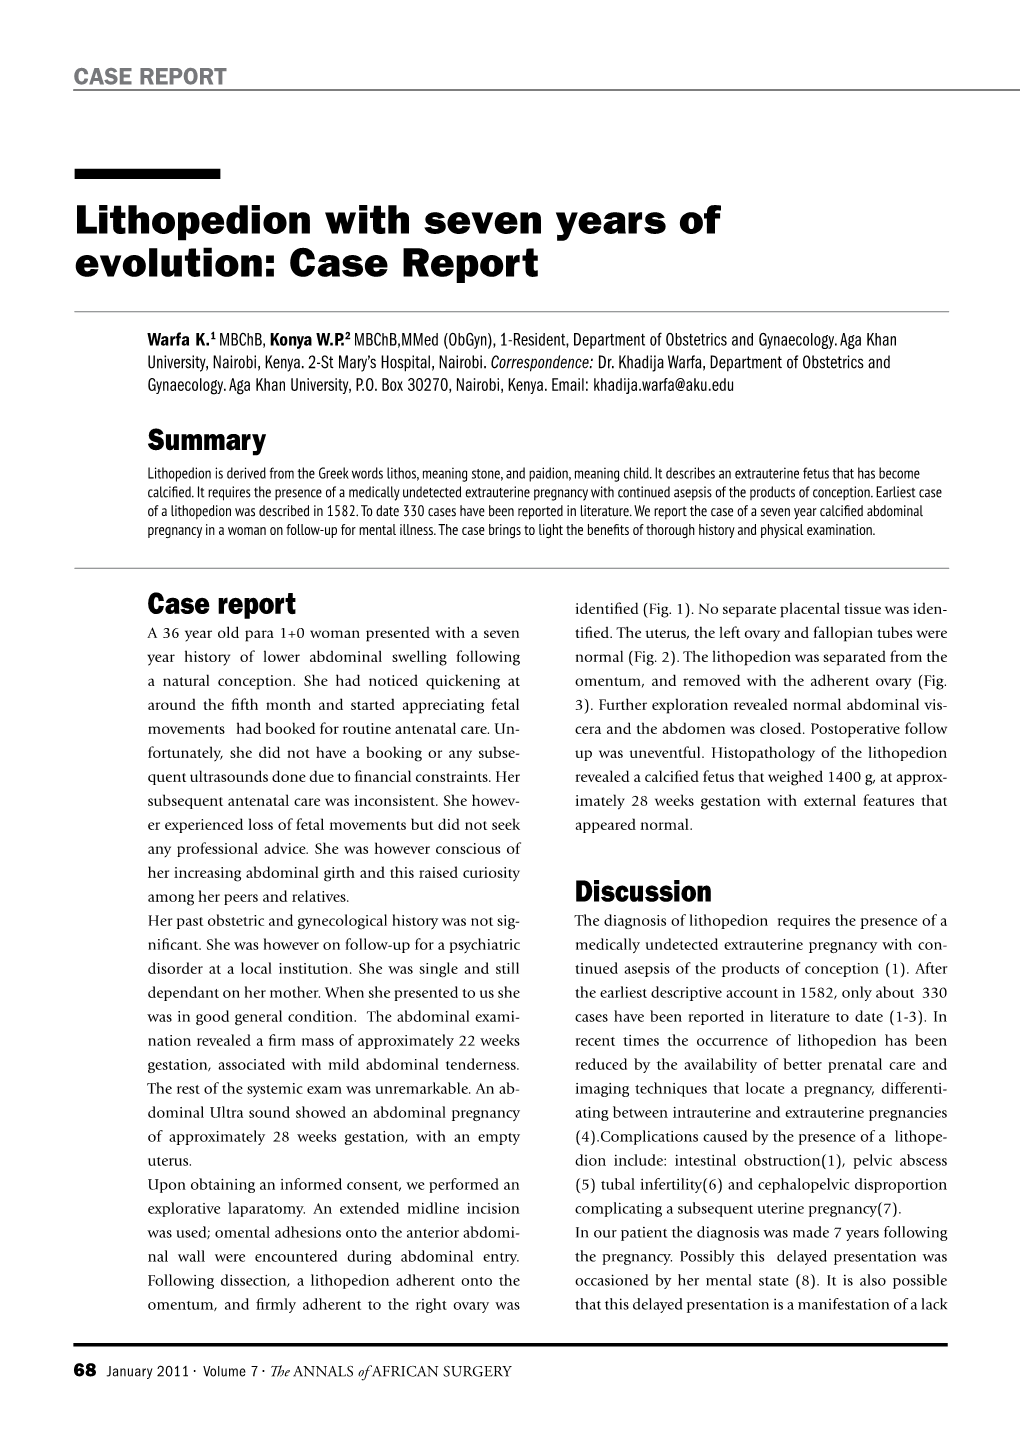 Lithopedion with Seven Years of Evolution: Case Report